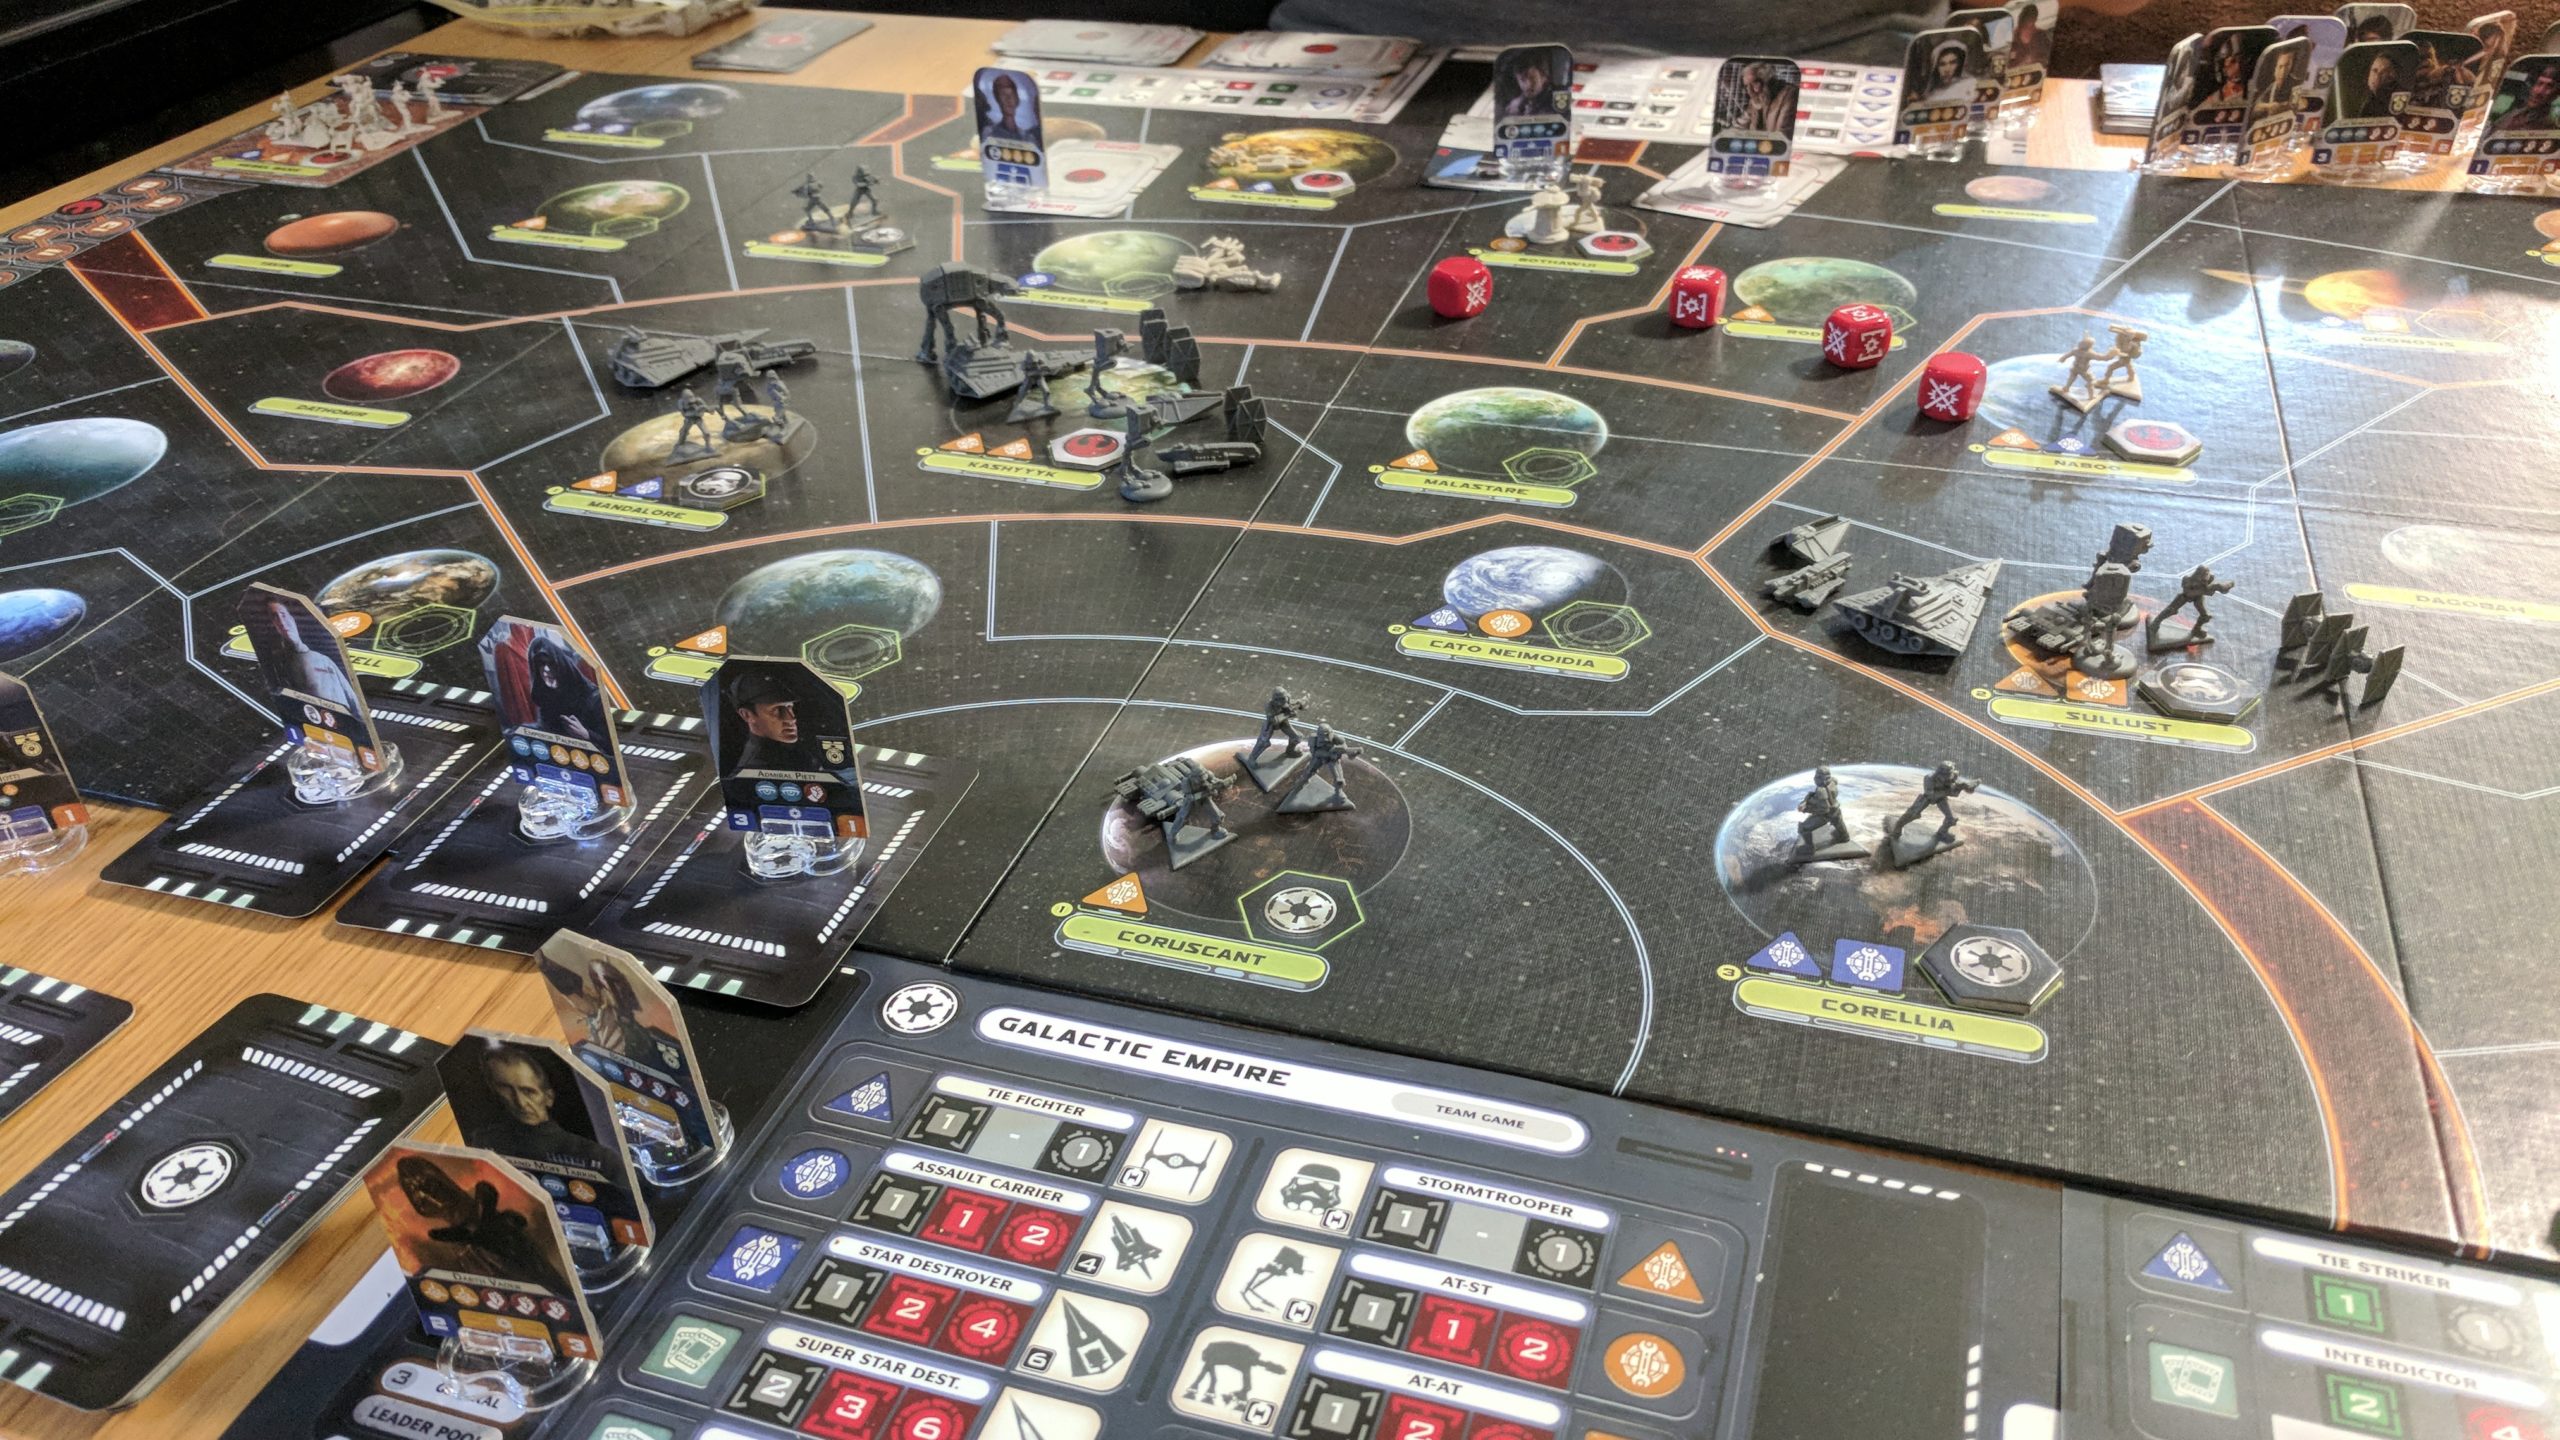 Star Wars Rebellion Rise Of The Empire: The Kotaku Review